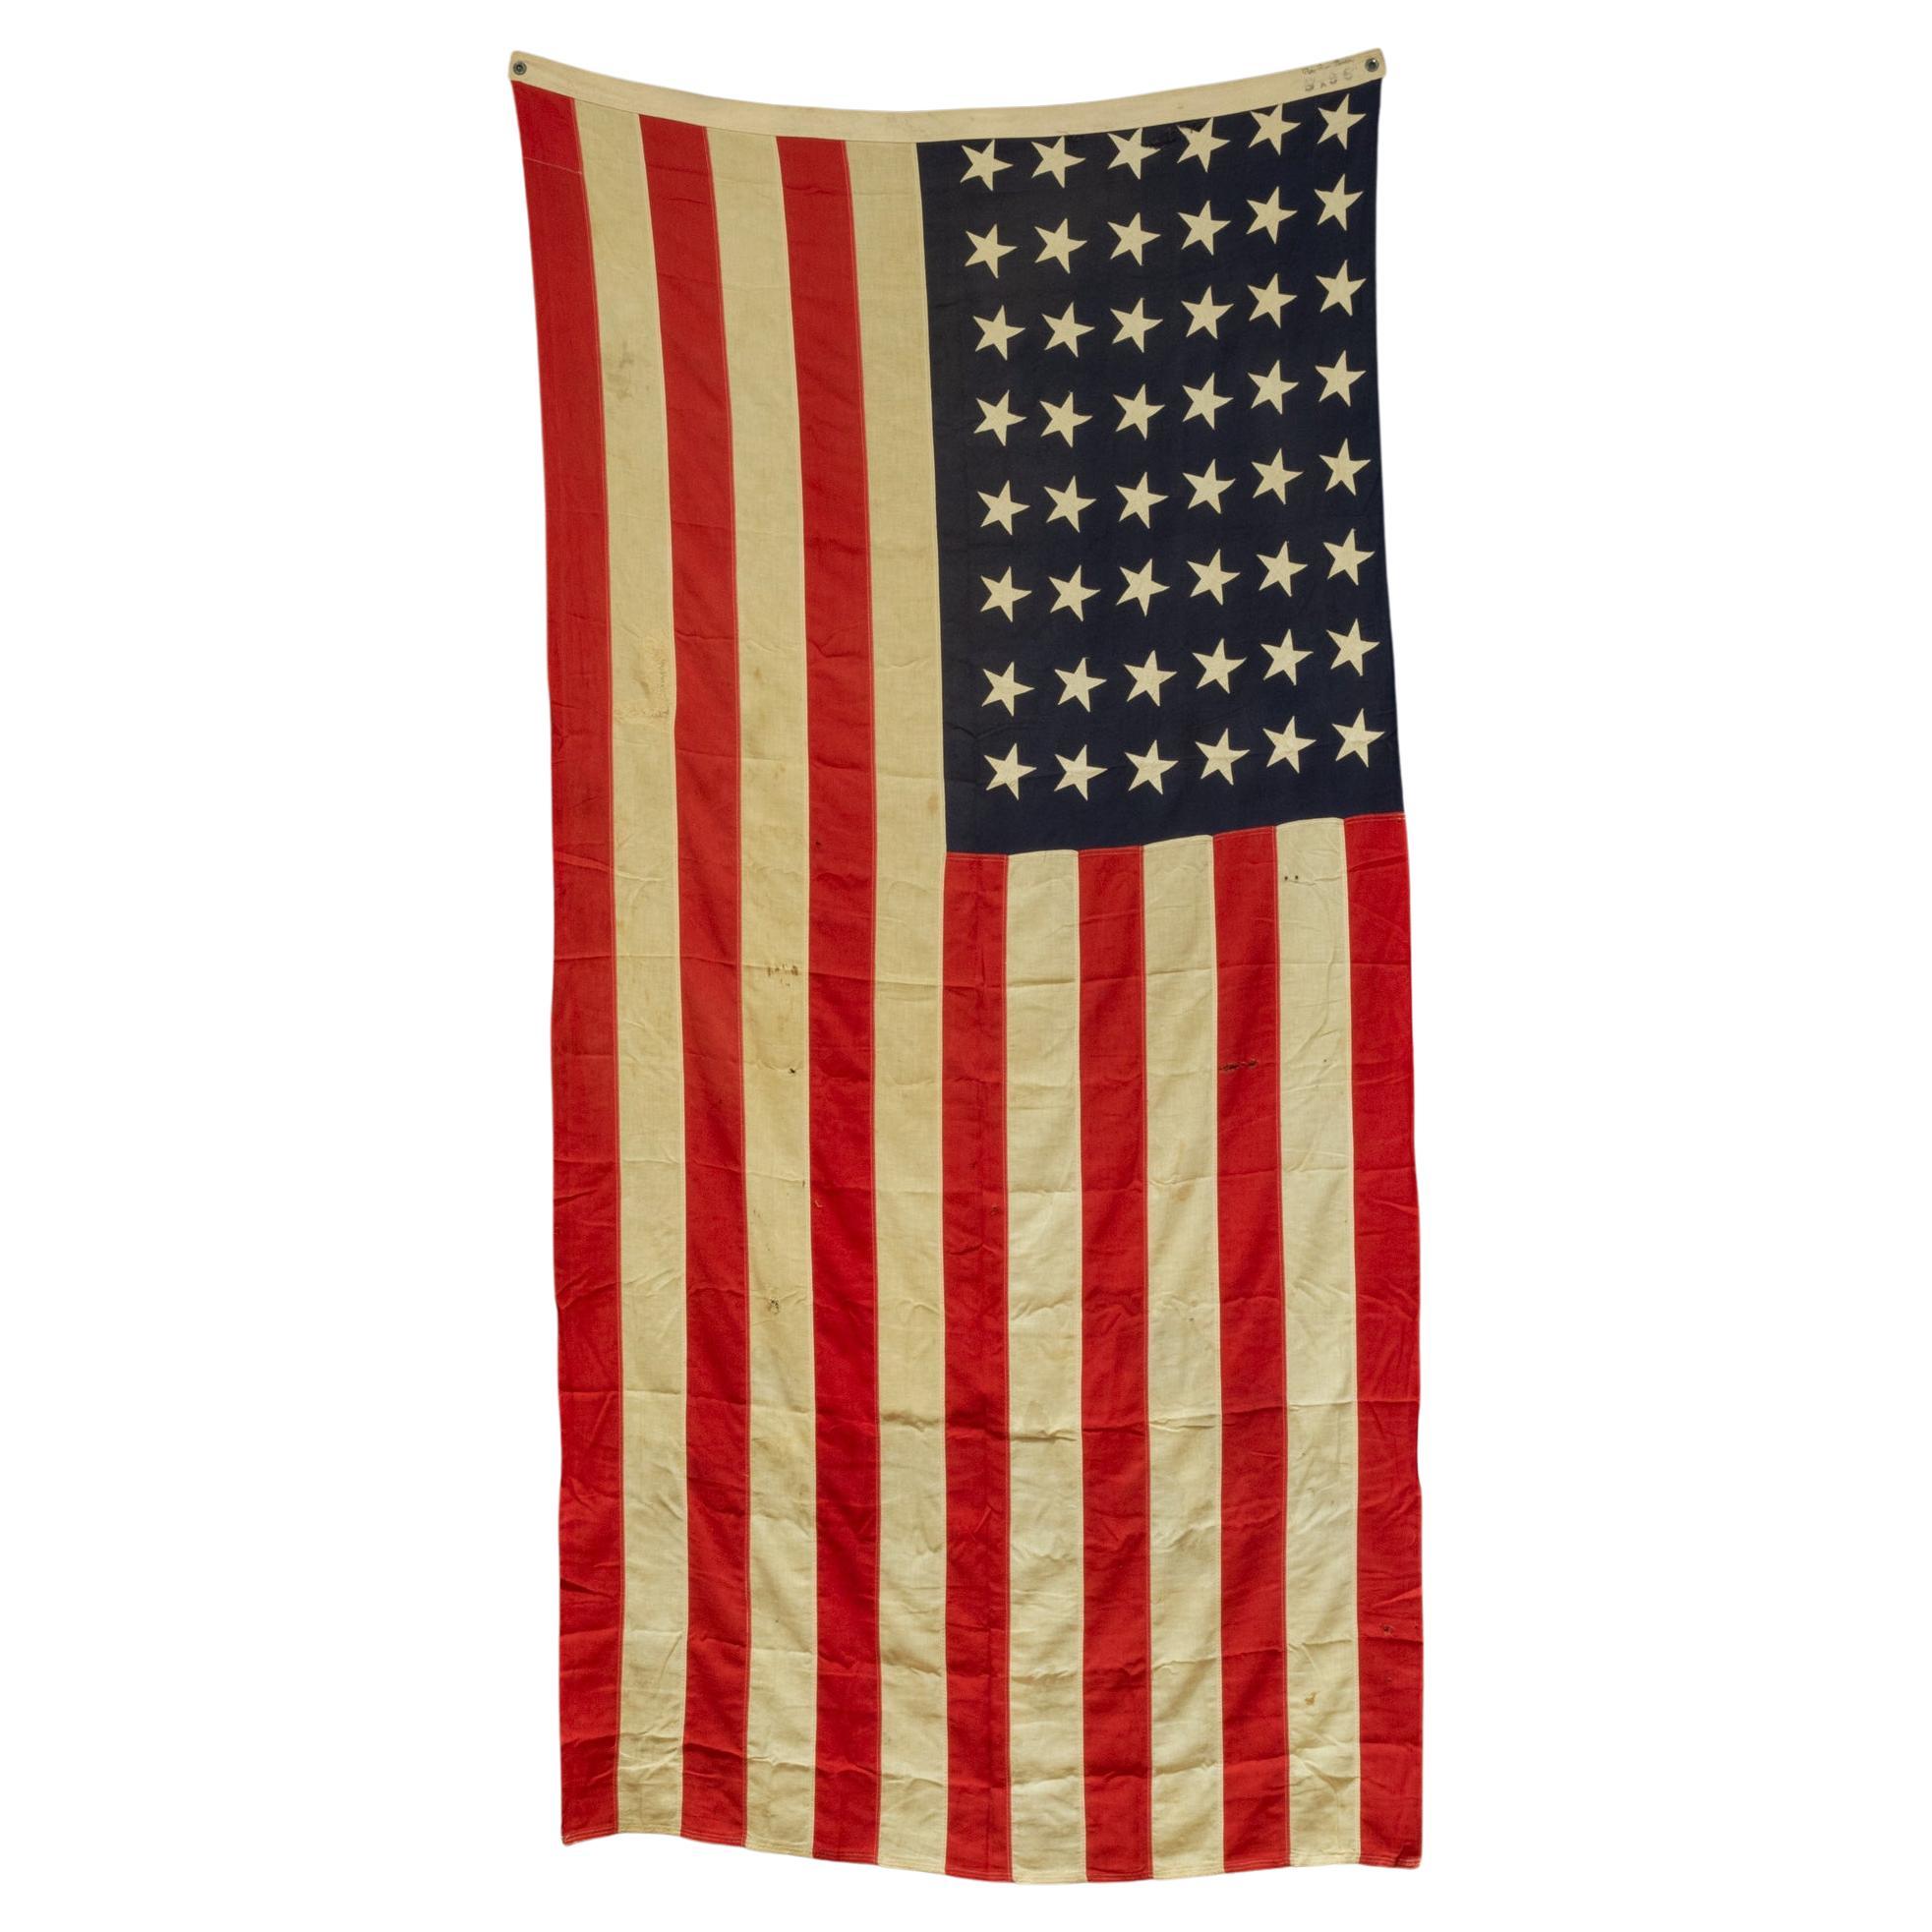 Early 20th c. "Besty Ross Bunting" Large American Flag with 48 Stars c.1940-1950